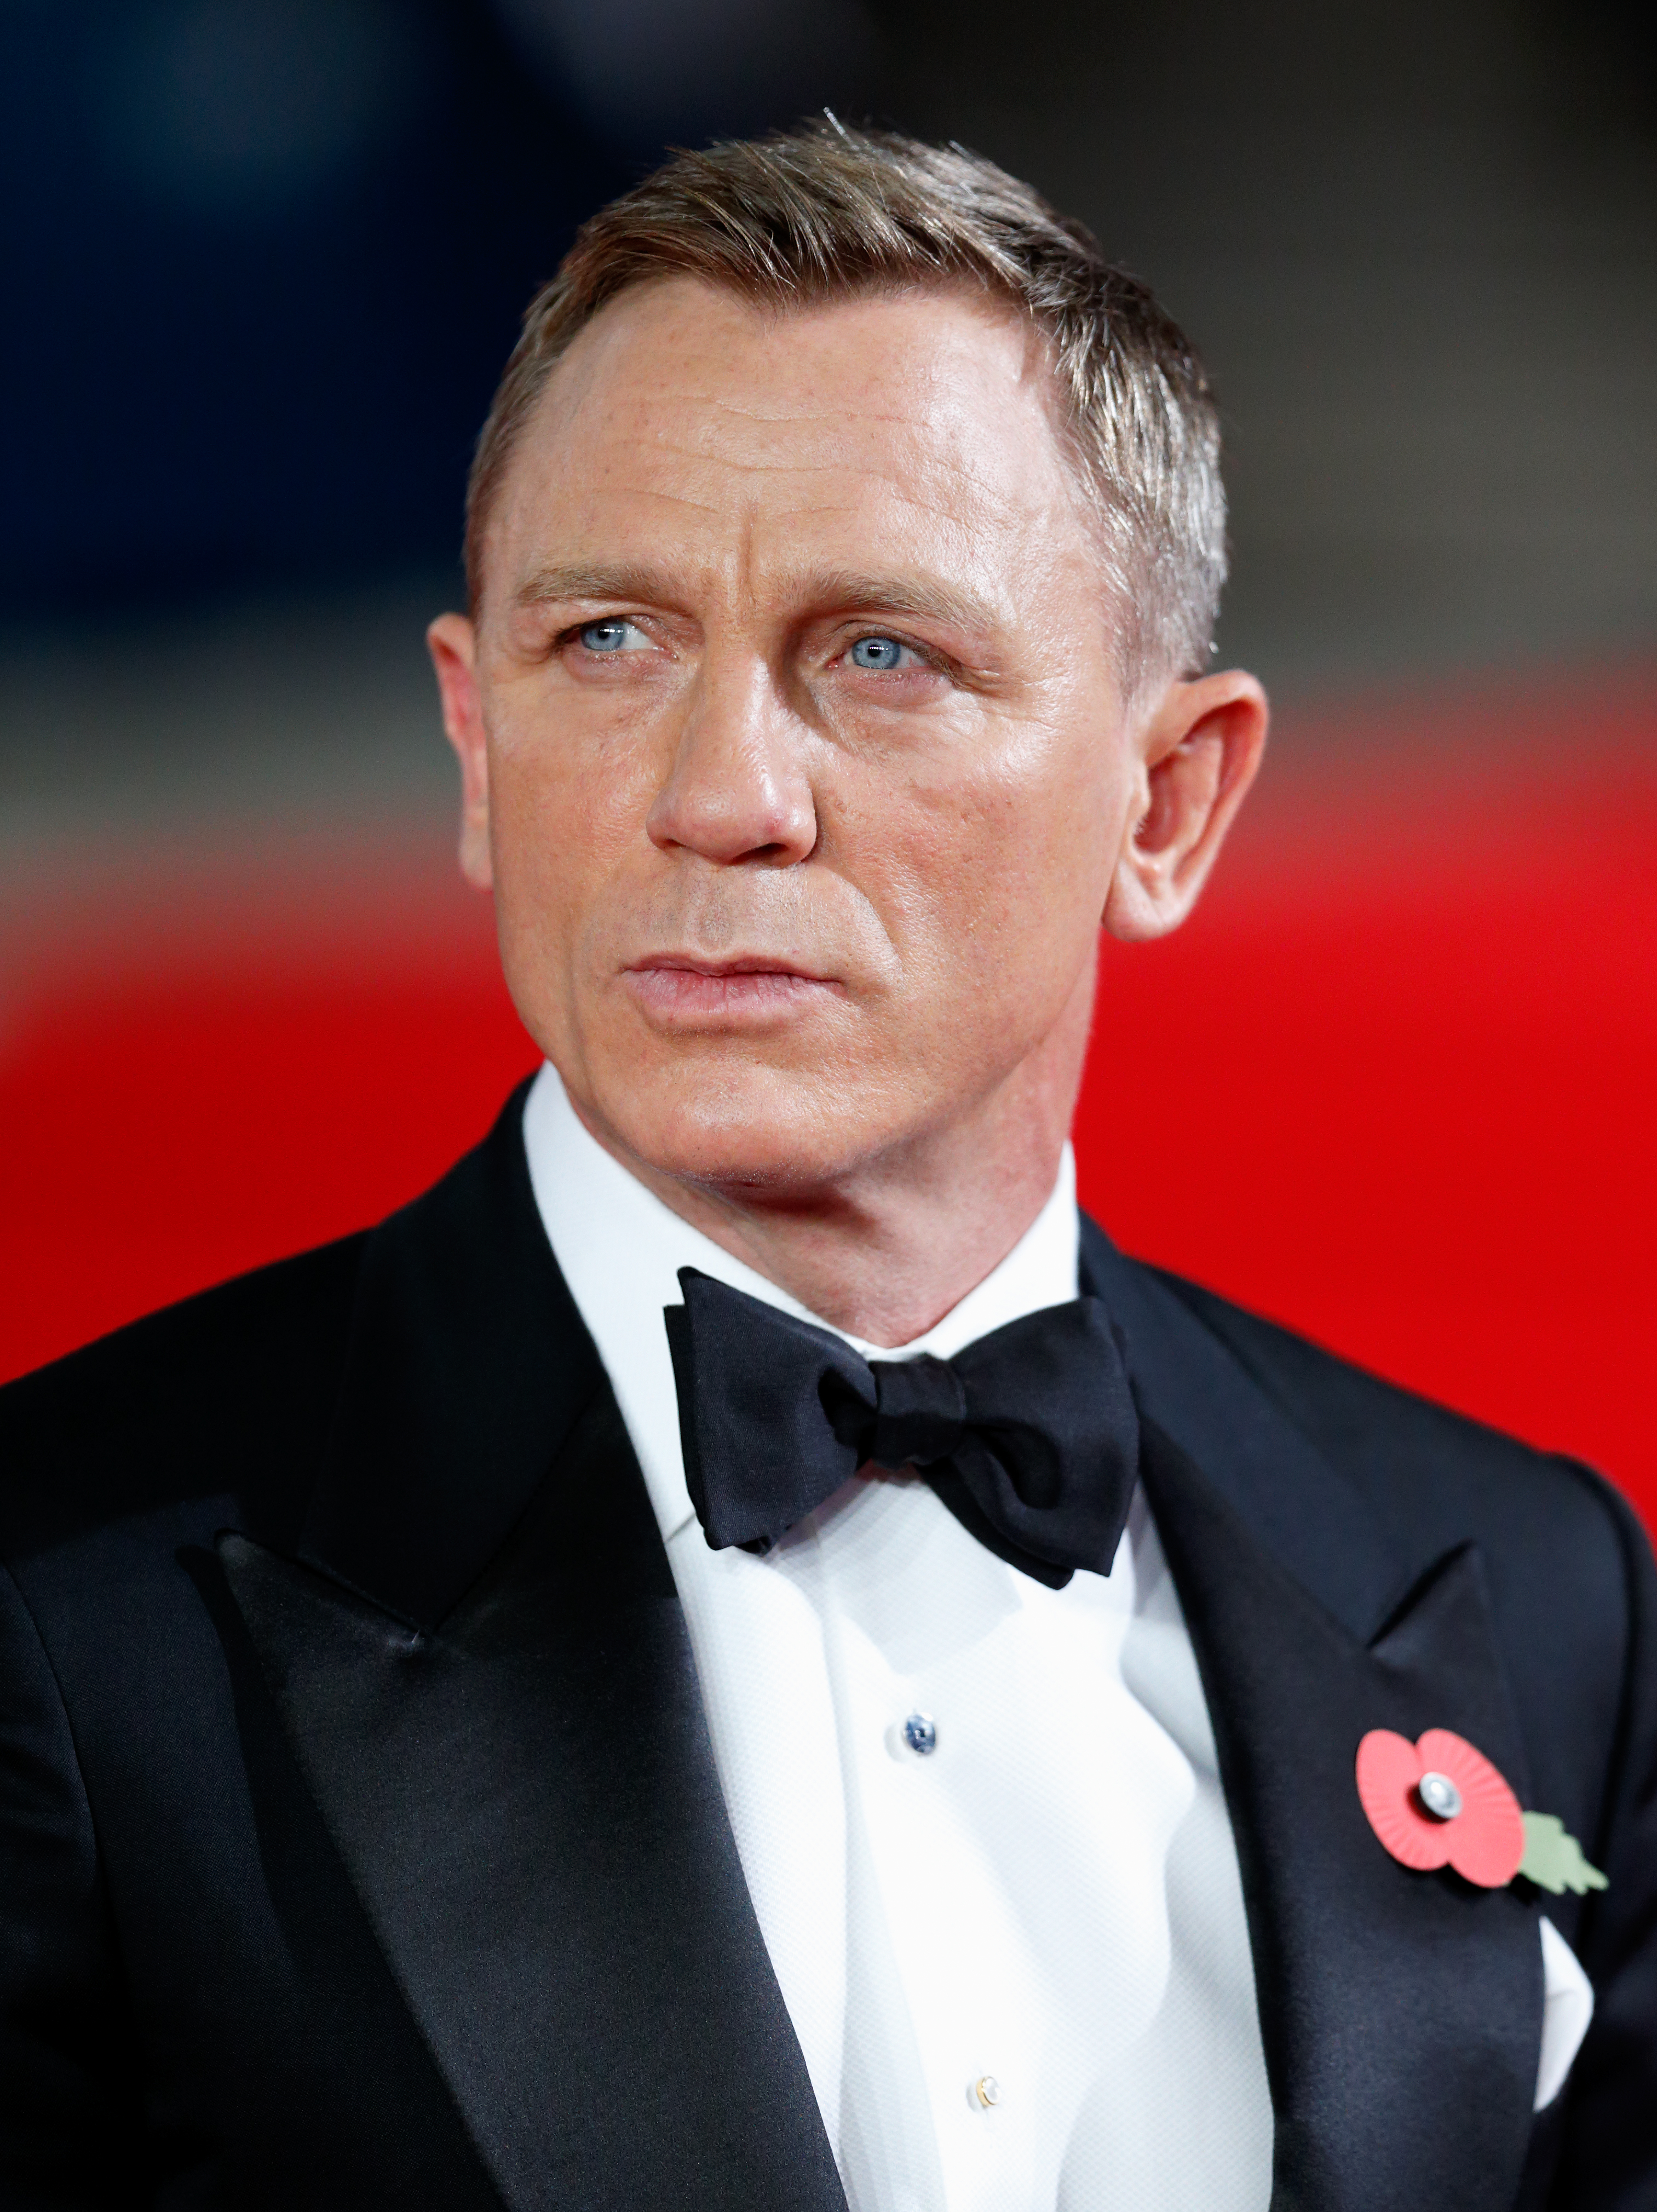 Daniel Craig attends the Royal Film Performance of "Spectre" at The Royal Albert Hall on October 26, 2015 in London, England. | Source: Getty Images